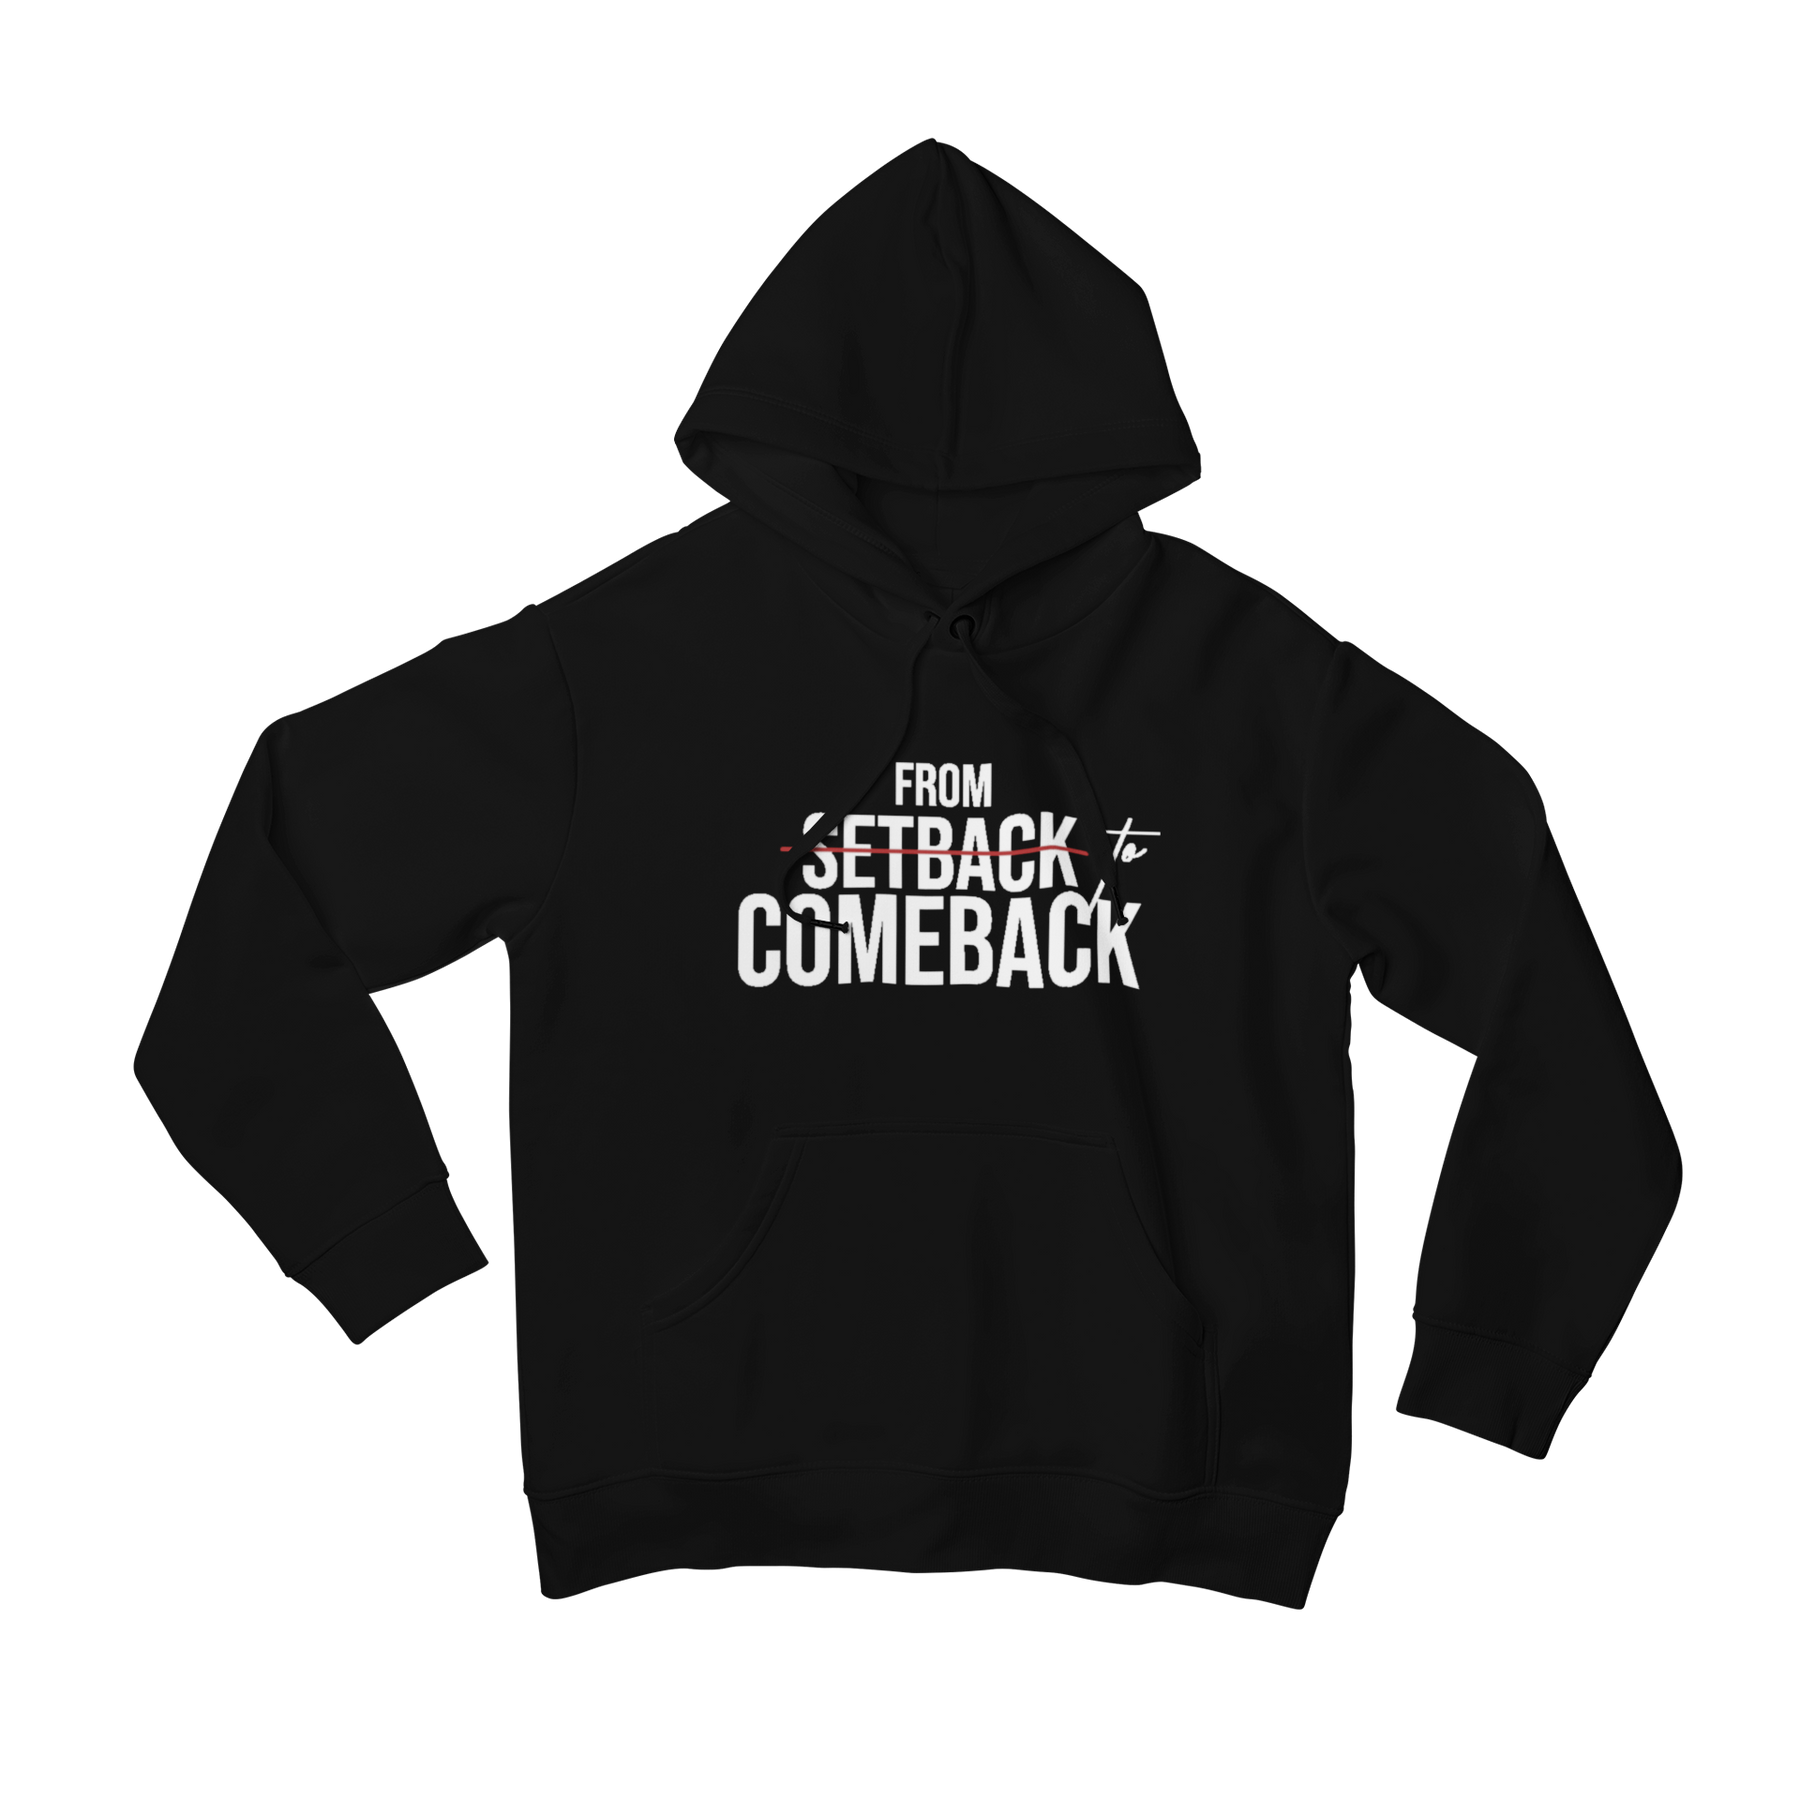 From Setback to Comeback" Unisex Hoodie (MORE COLORS AVAILABLE) Jamila T. Davis